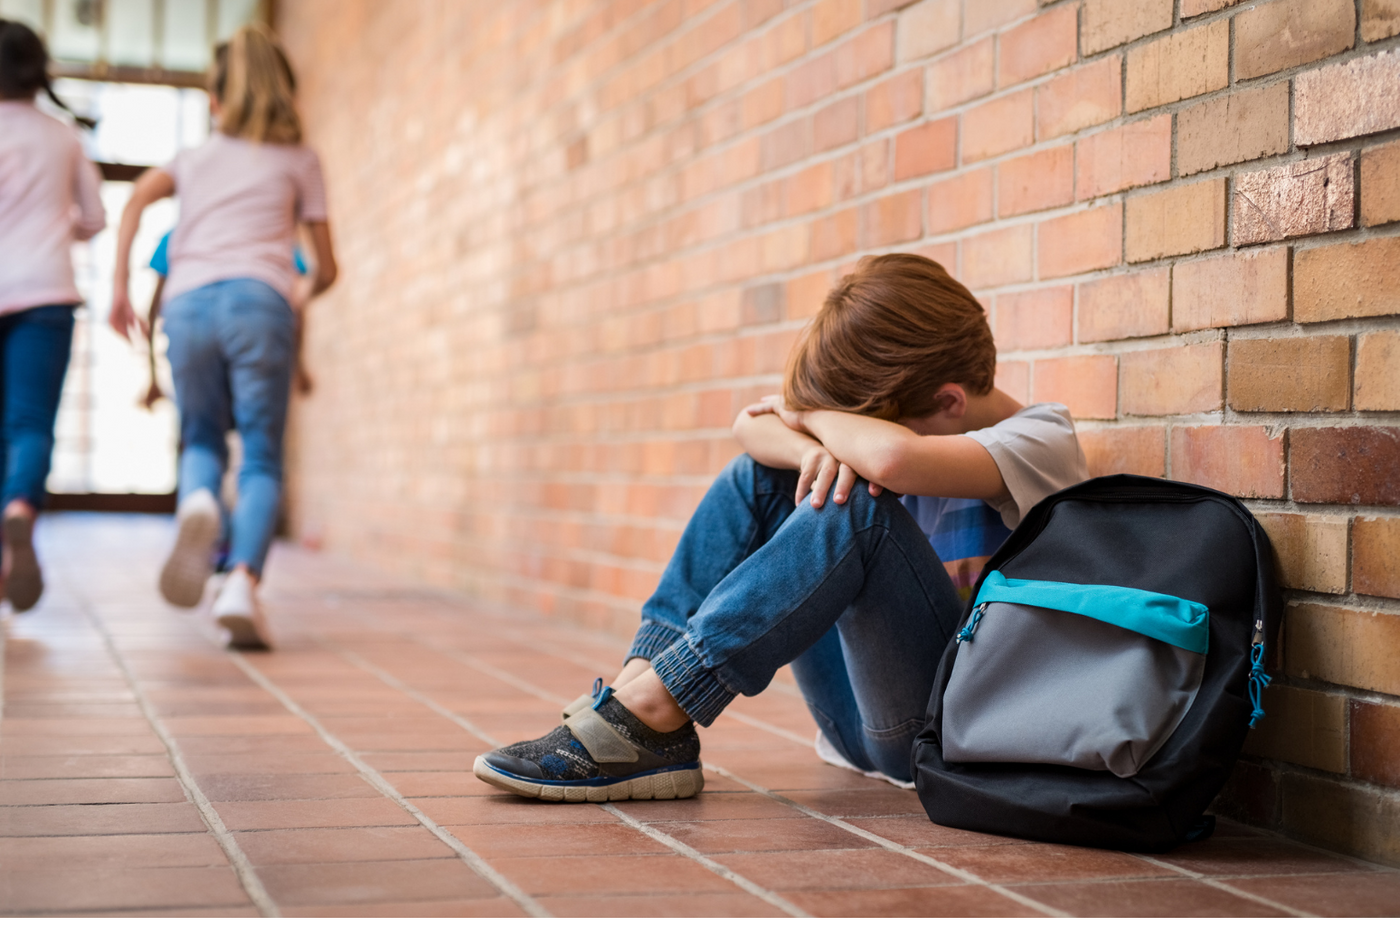 Child Abuse, Bullying, and Warning Signs